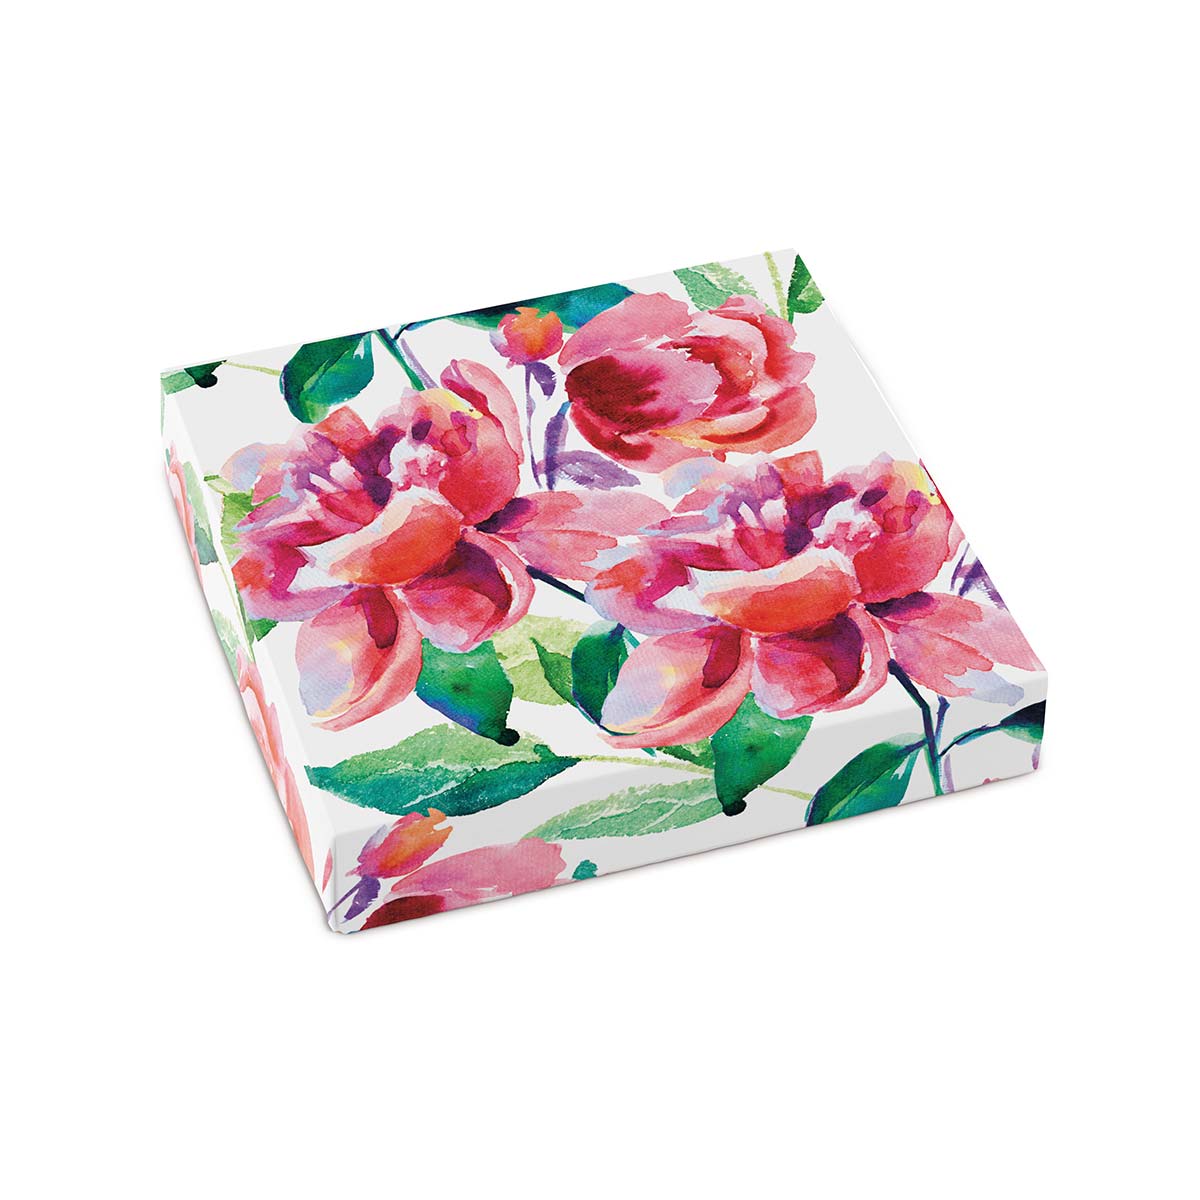 Painted Peonies Themed Box Cover for 9 Piece Holiday Assortment